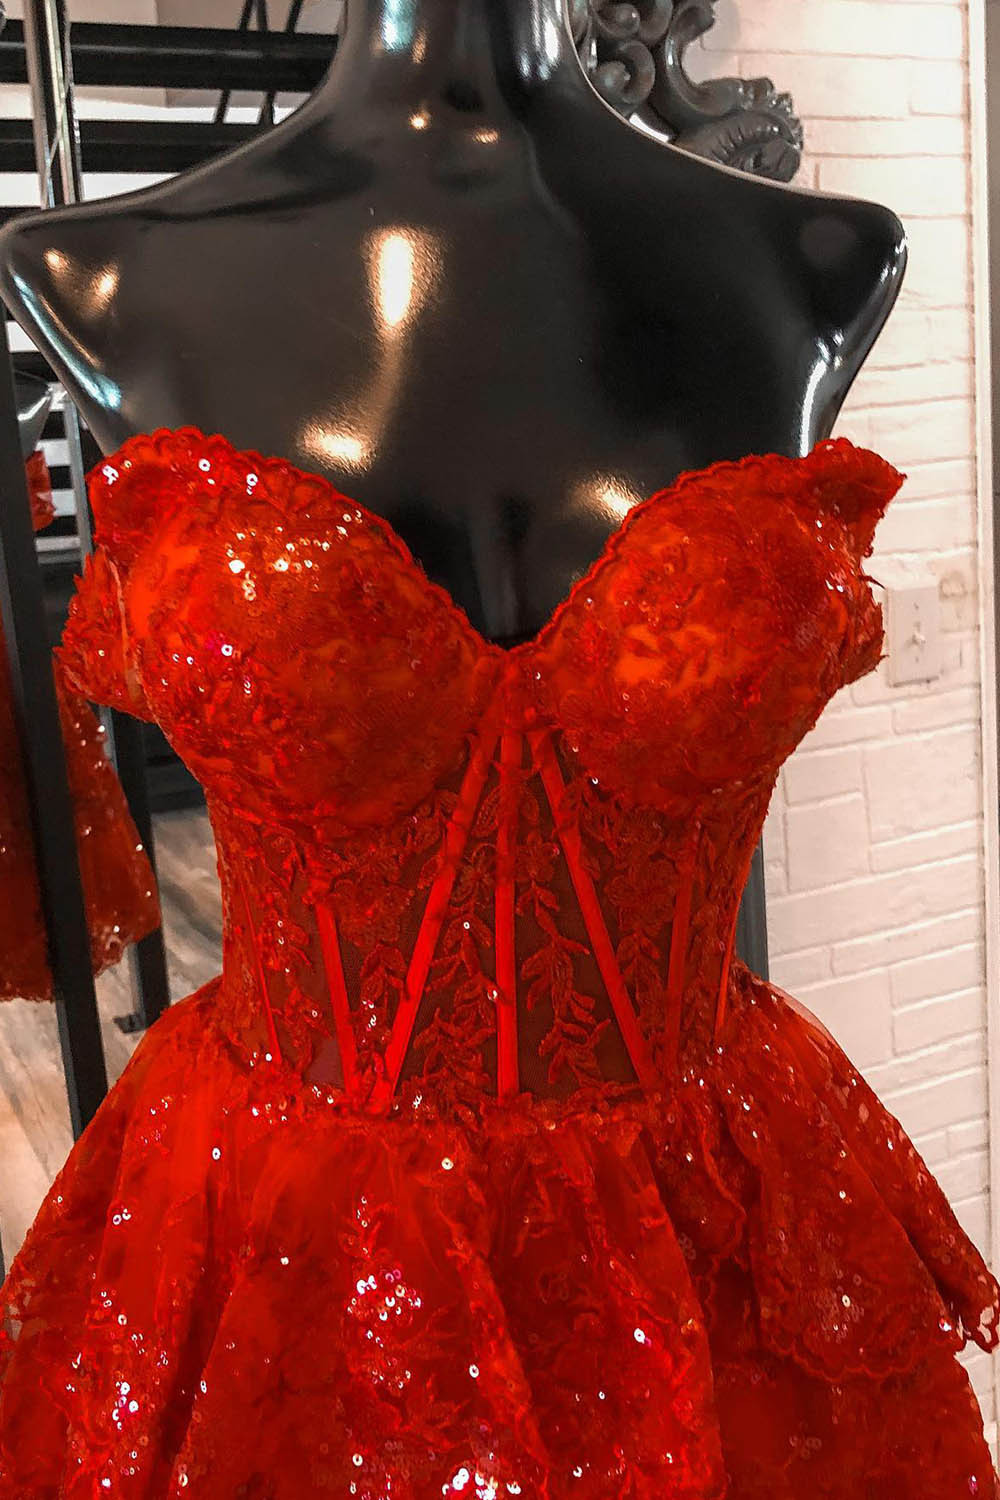 Sparkly Red Corset Tiered Lace A-Line Short Homecoming Dress